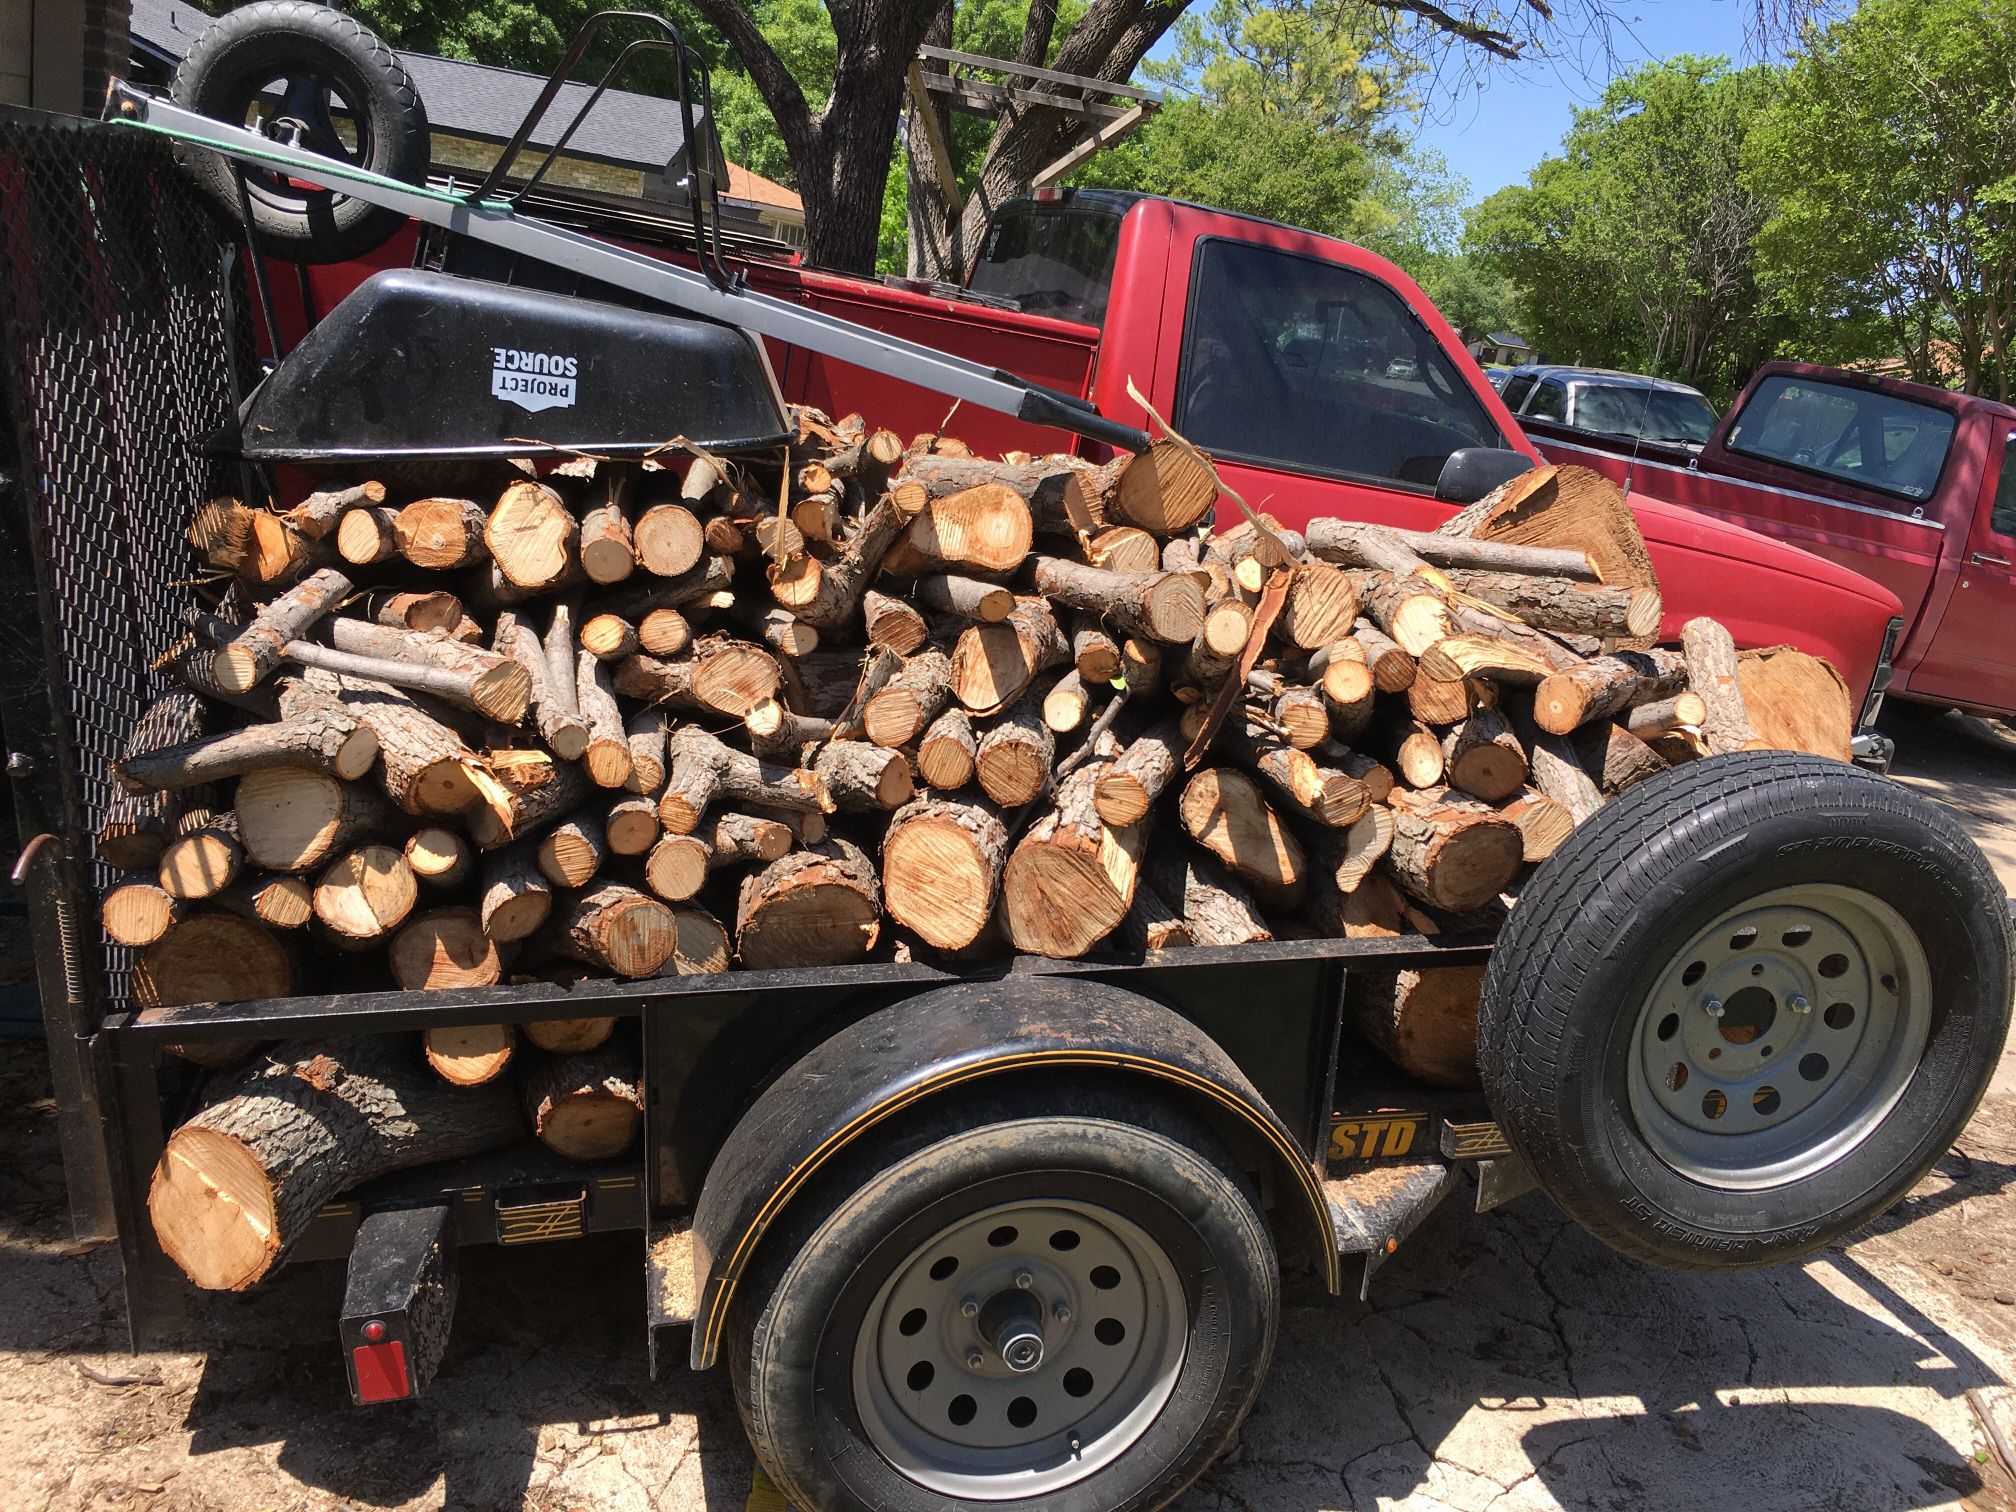 2 Pecan trees on the truck ready for firewood